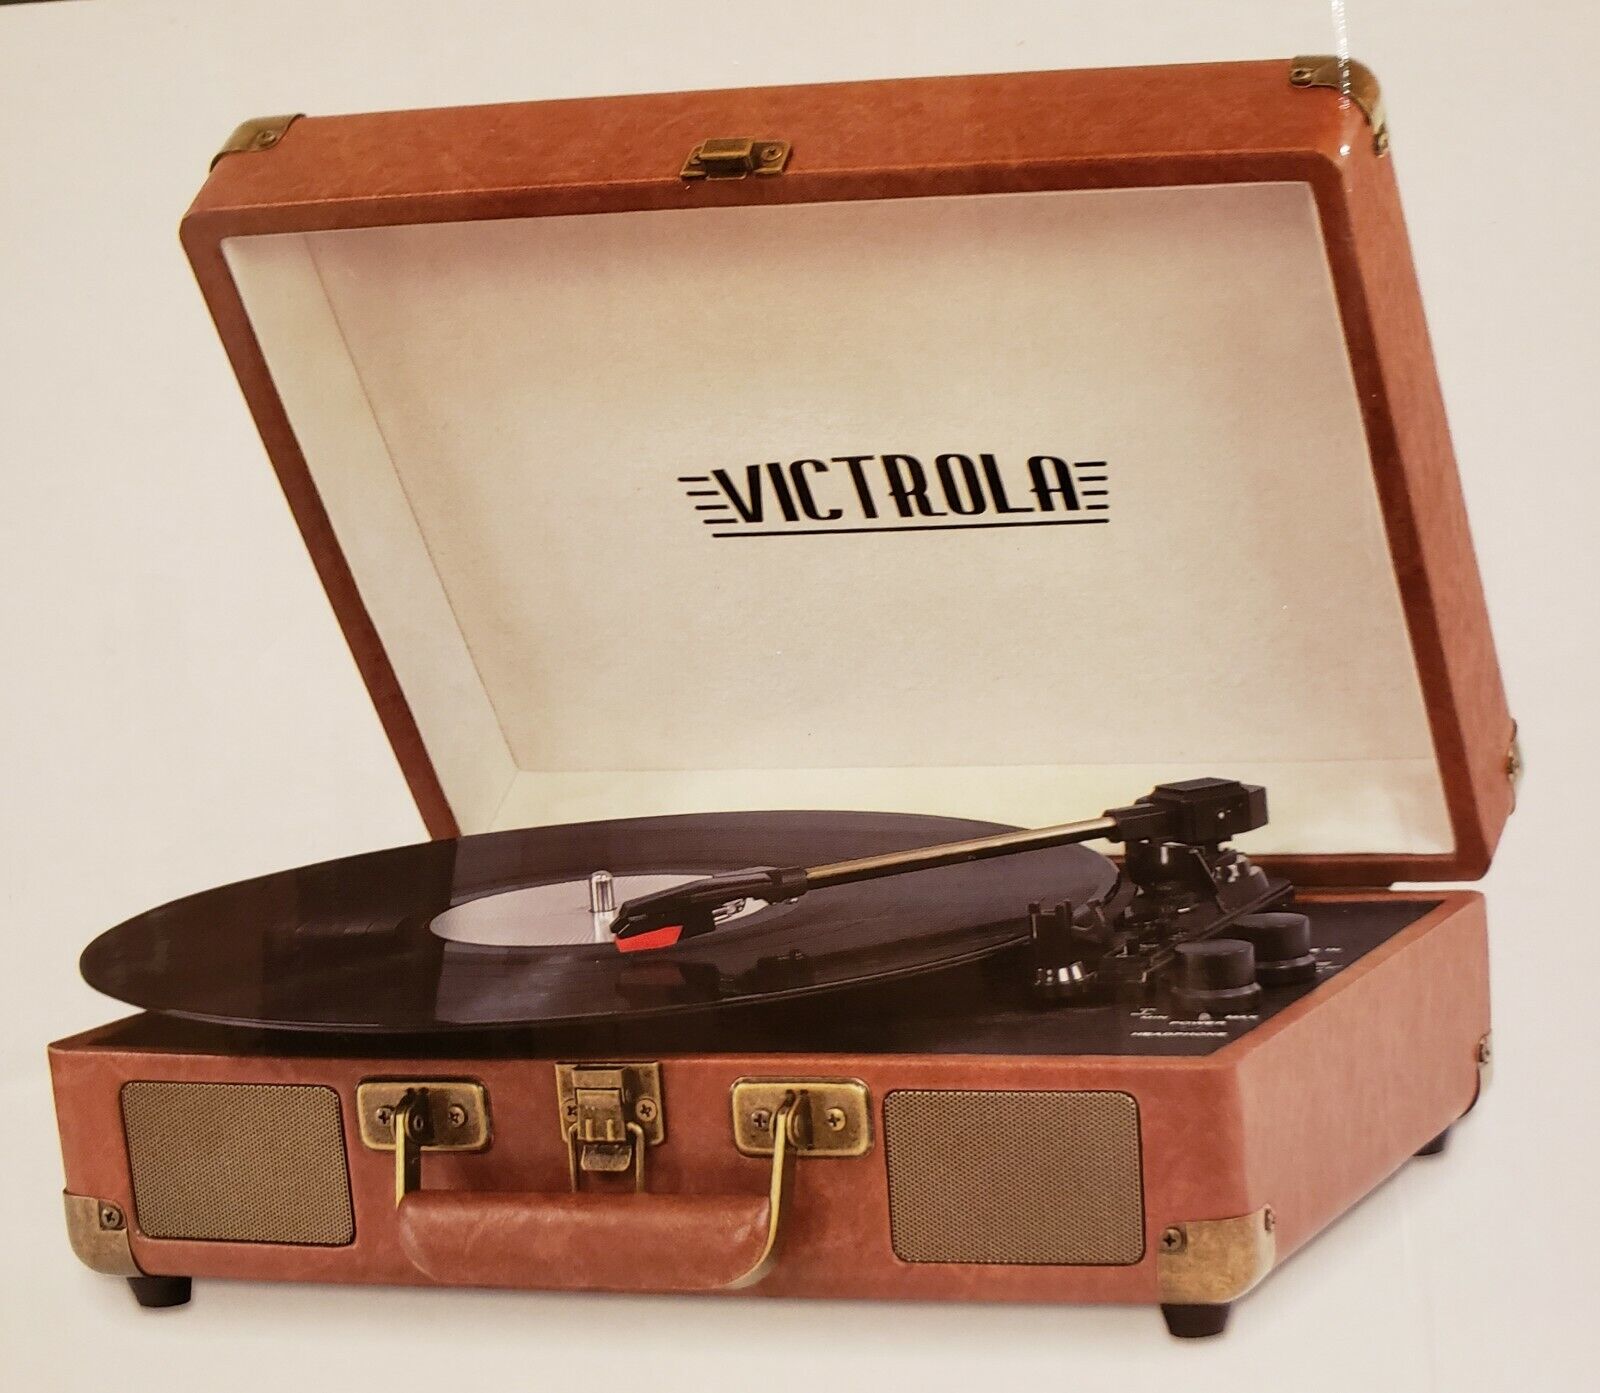 Victrola Suitcase 3-Speed Record Player with Dual Bluetooth Connectivity, New